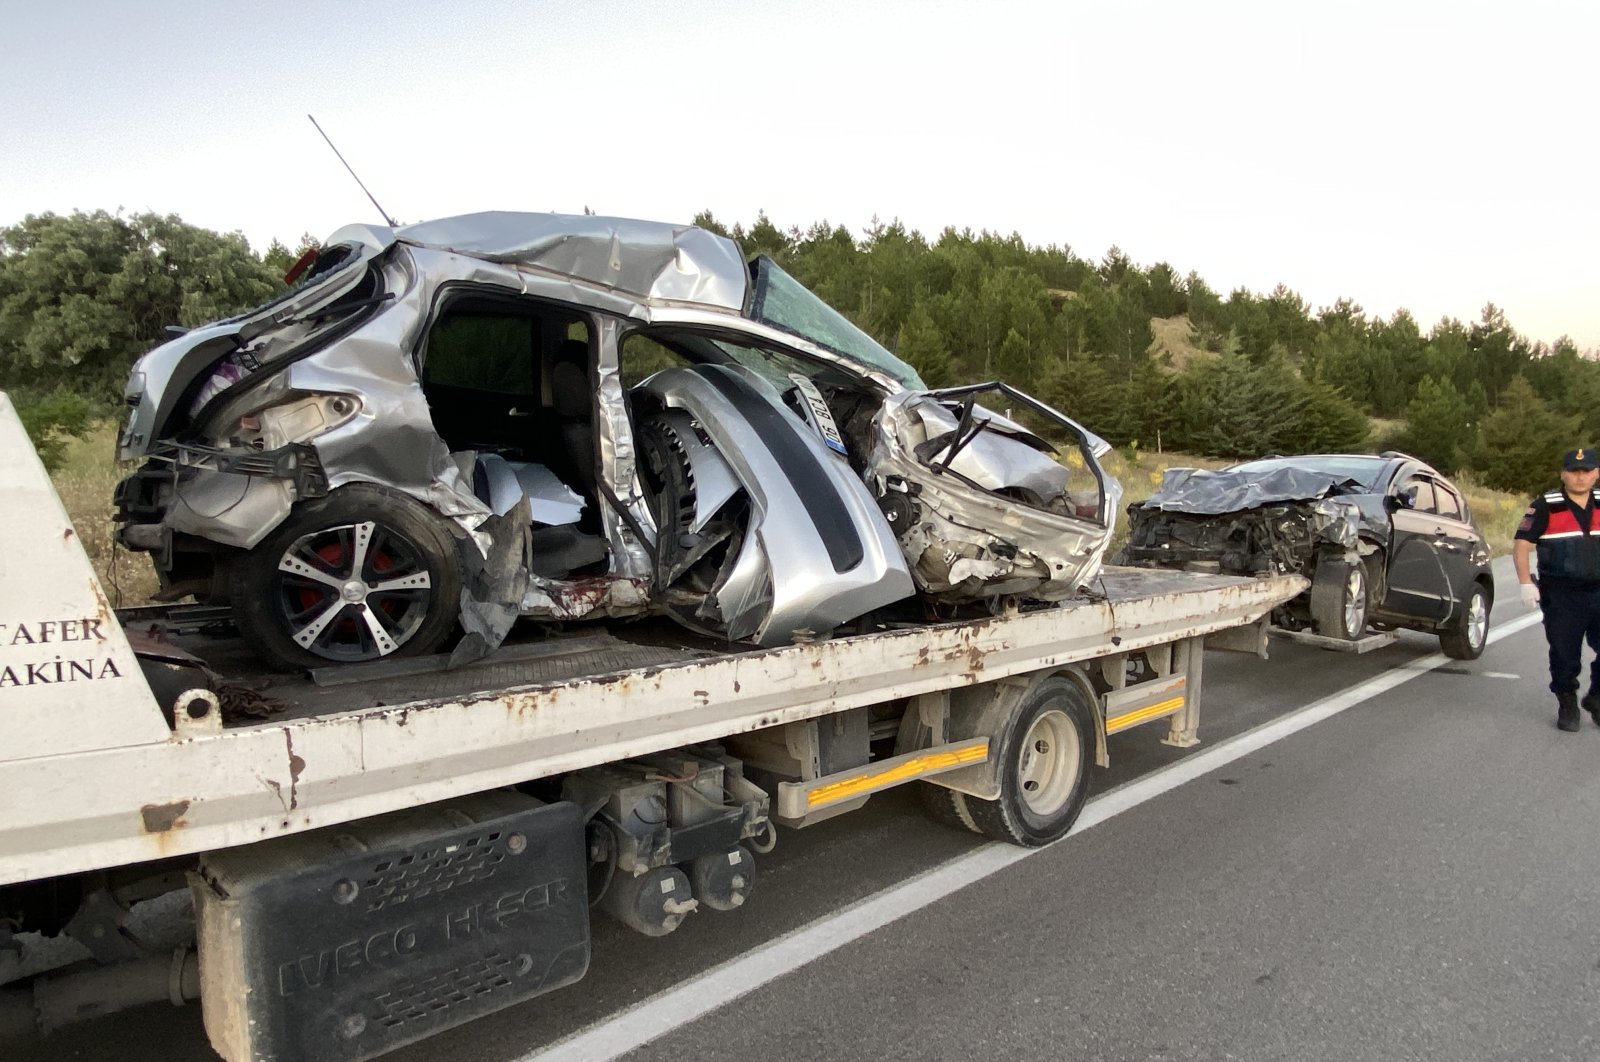 The wreckage of cars being loaded on a tow truck, in Konya, central Turkey, July 3, 2022. (İHA PHOTO)